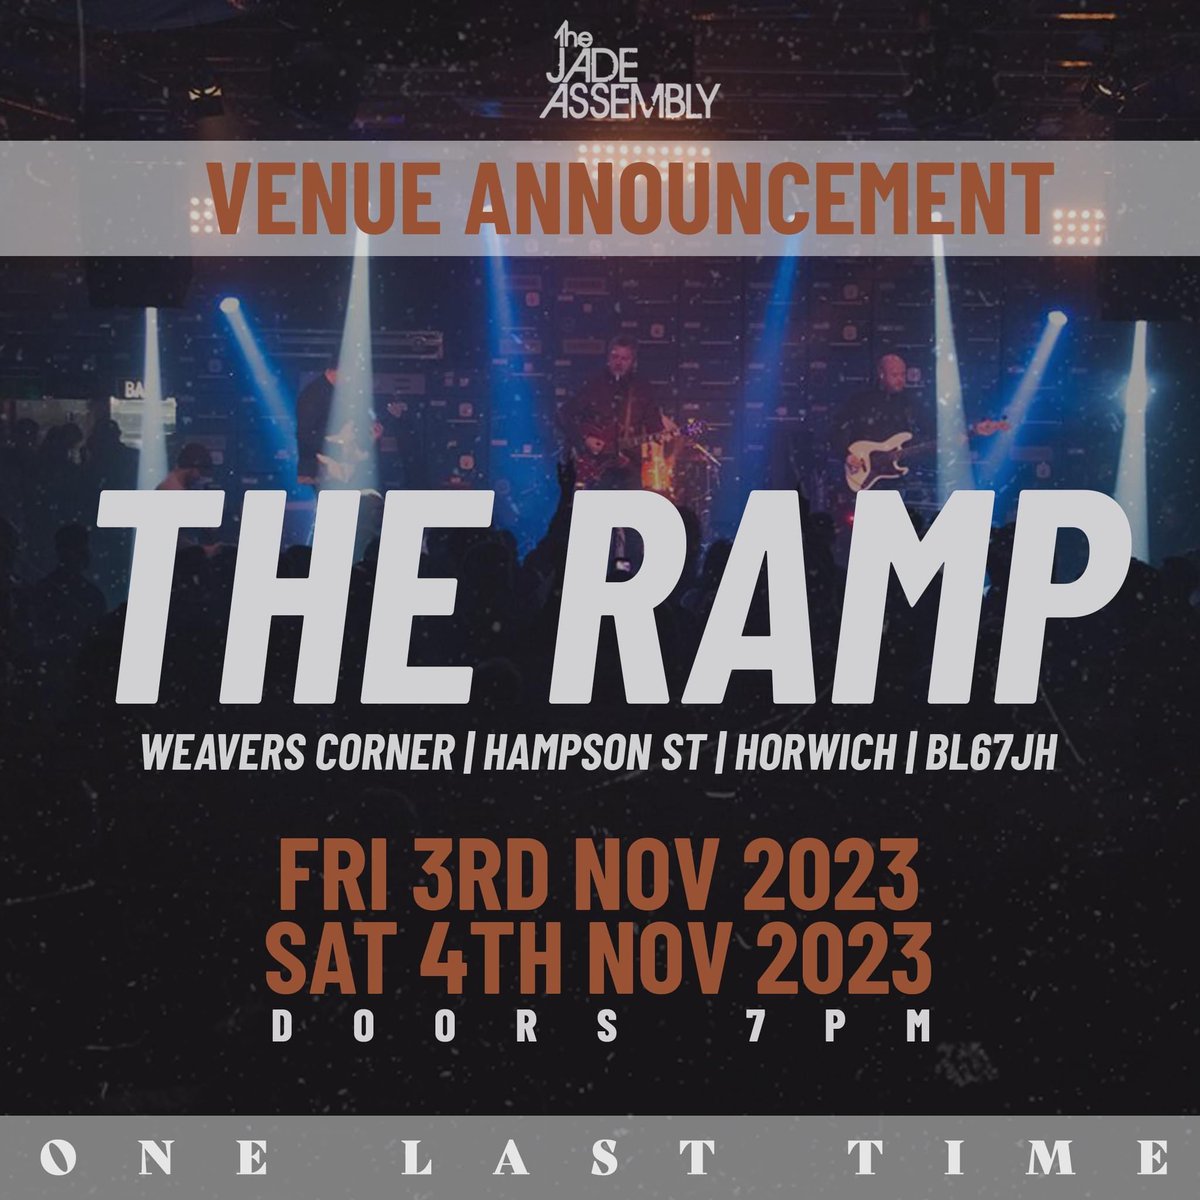 ONE LAST TIME | VENUE ANNOUNCEMENT 📣 We're really happy to announce the Venue for our 'One Last Time' farewell shows is The Ramp! More info to follow.... 👀 @project_shed | @cloudsanderrors | @KaidenNolan TJA x #OLT #SOLDOUT